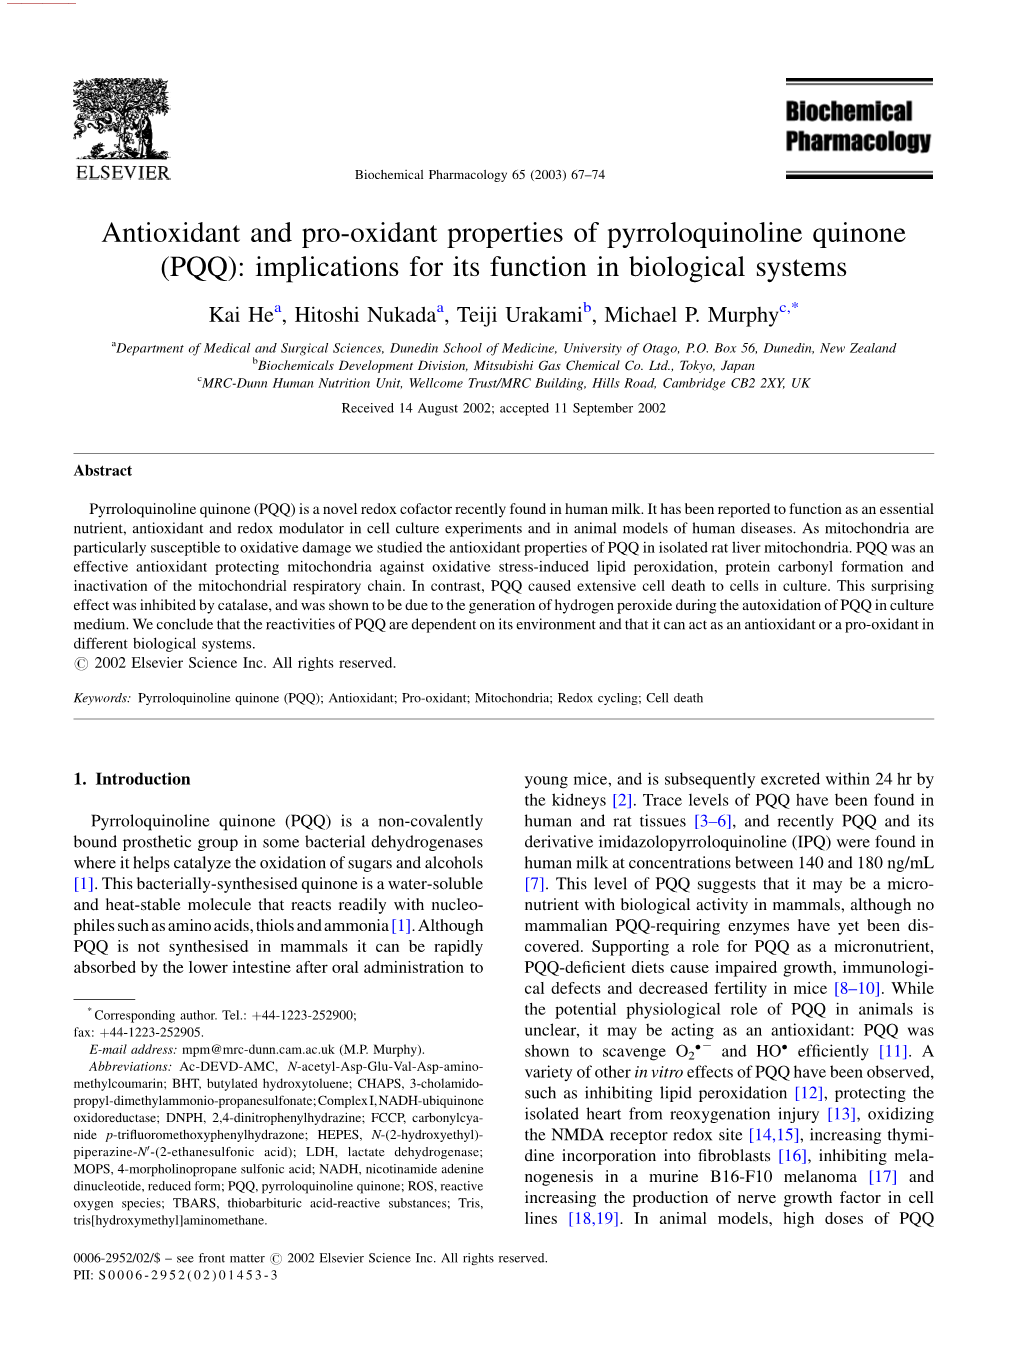 Antioxidant and Pro-Oxidant Properties of Pyrroloquinoline Quinone (PQQ): Implications for Its Function in Biological Systems